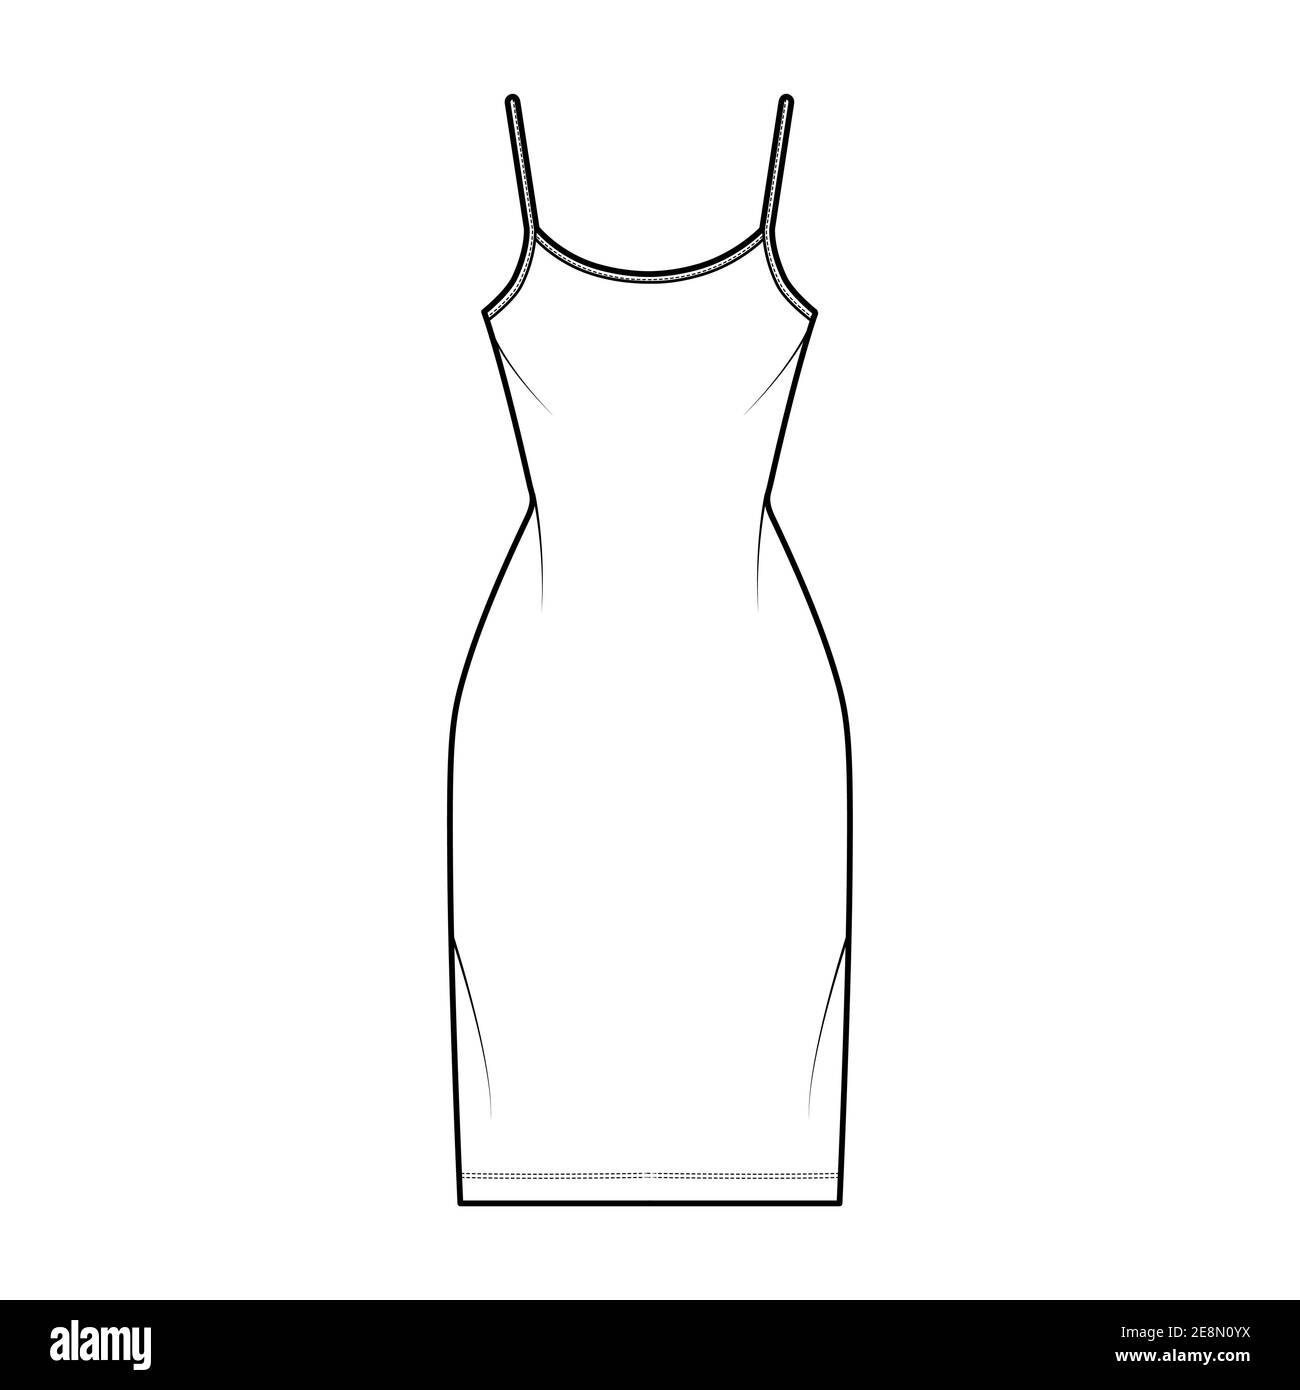 Camisole dress technical fashion illustration with scoop neck, straps ...